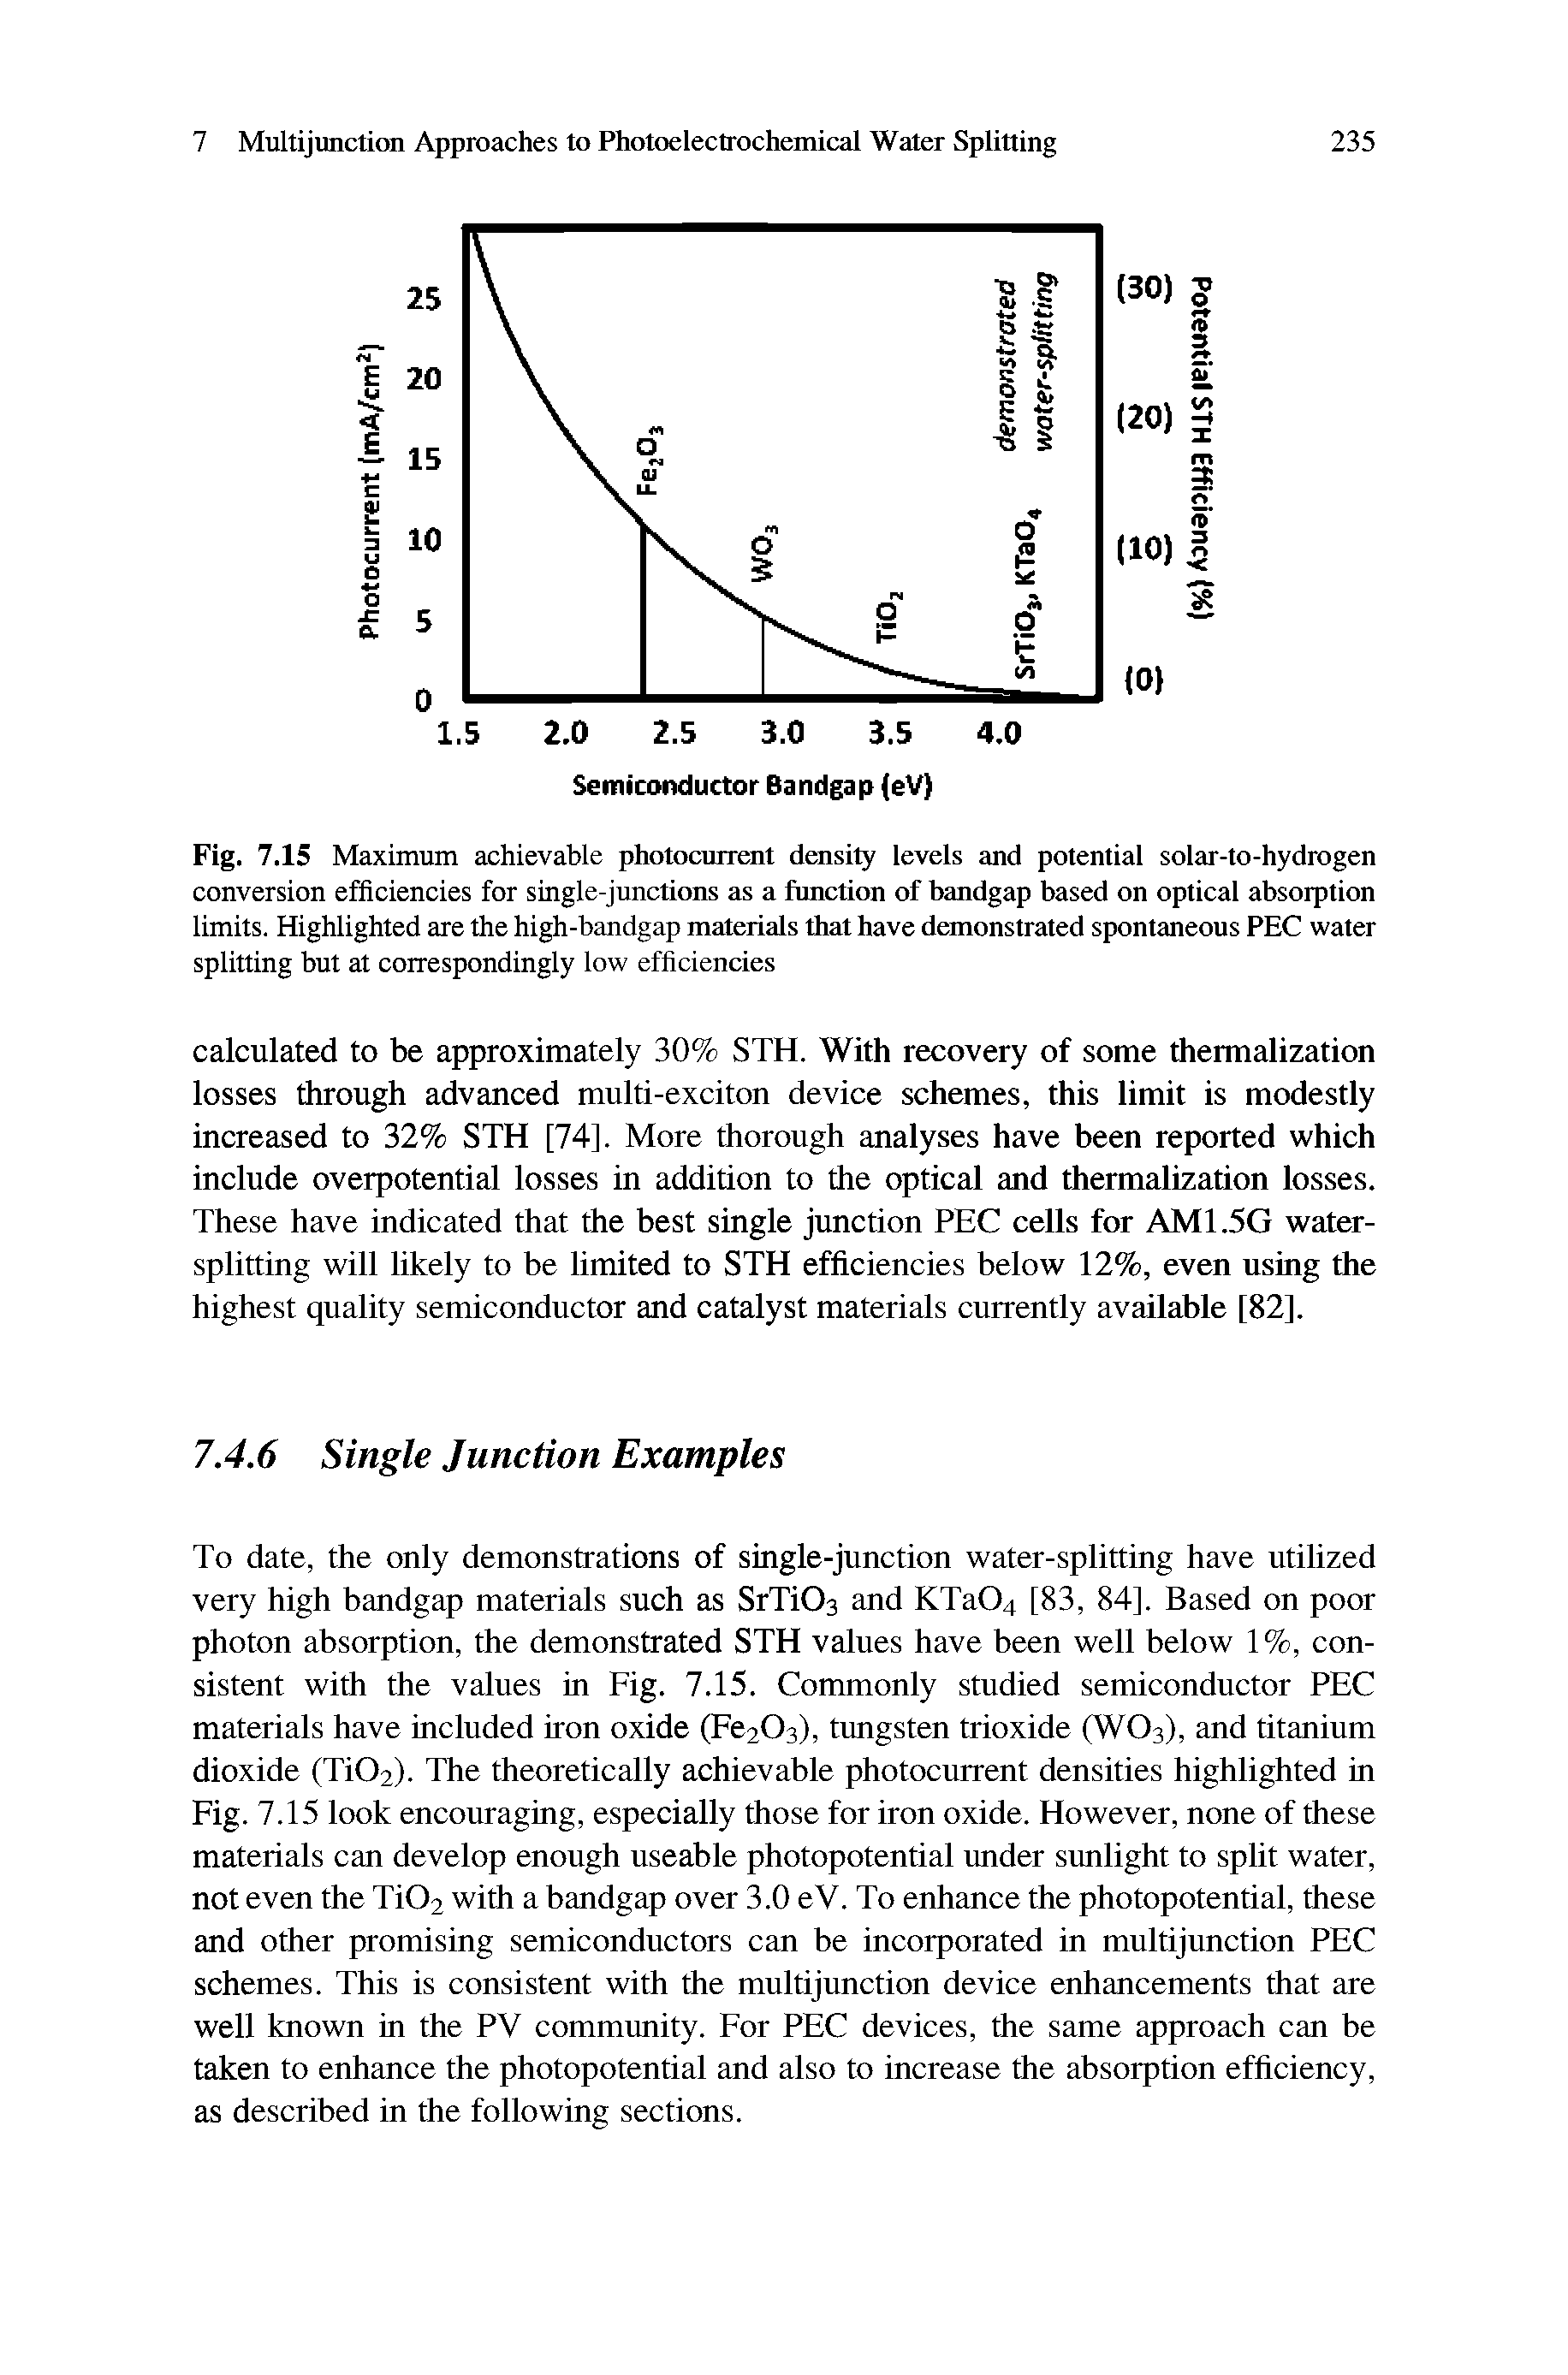 Fig. 7.15 Maximum achievable photocurrent density levels and potential solar-to-hydrogen conversion efficiencies for single-junctions as a function of bandgap based on optical absorption limits. Highlighted are the high-bandgap materials that have demonstrated spontaneous PEC water splitting but at correspondingly low efficiencies...